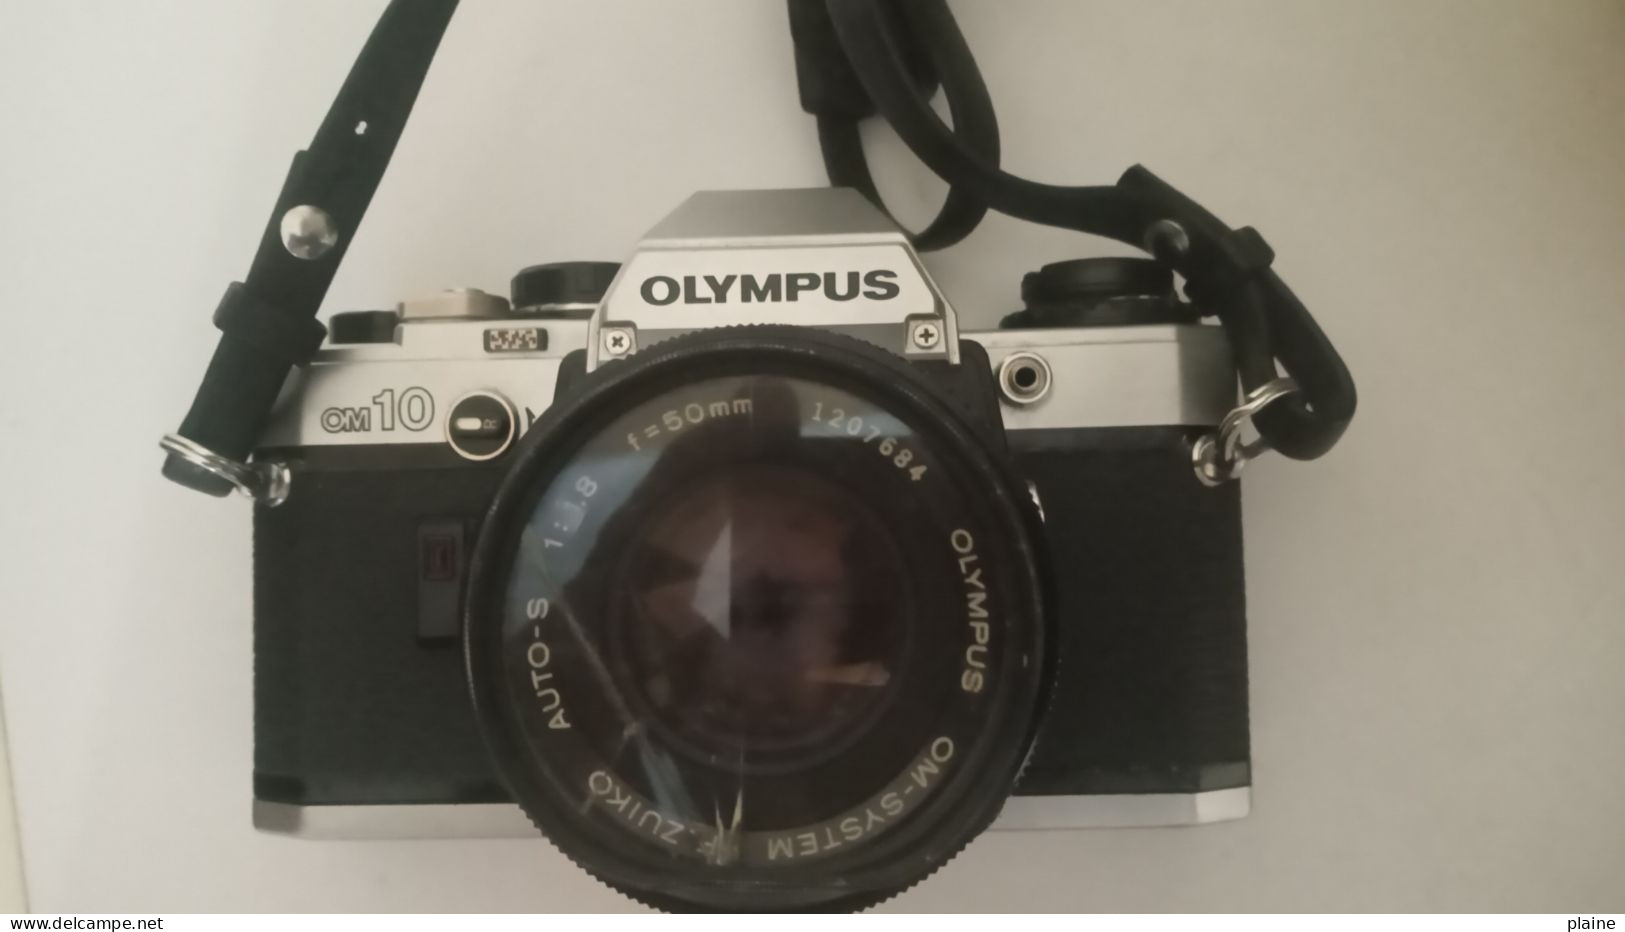 APPAREIL PHOTO D'OCCASION -OLYMPUS OM 10. - Fotoapparate